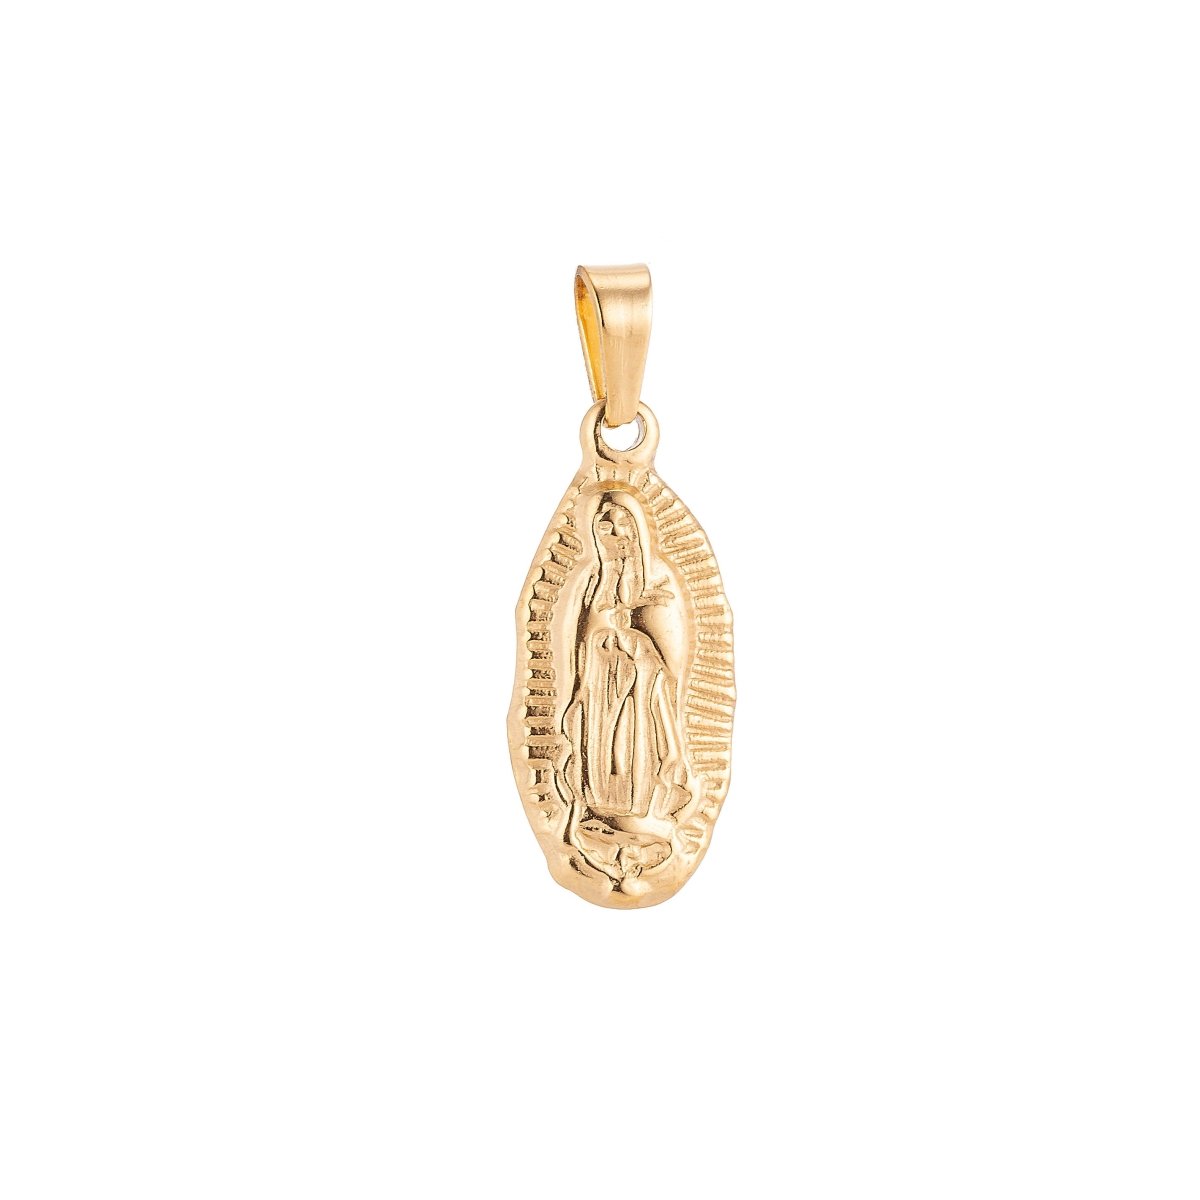 Gold Filled Stainless Steel Catholic Mother Mary Praying Charm Pendant w/ Bails Findings for Earring Necklace Jewelry Making Supplies J-379 - DLUXCA